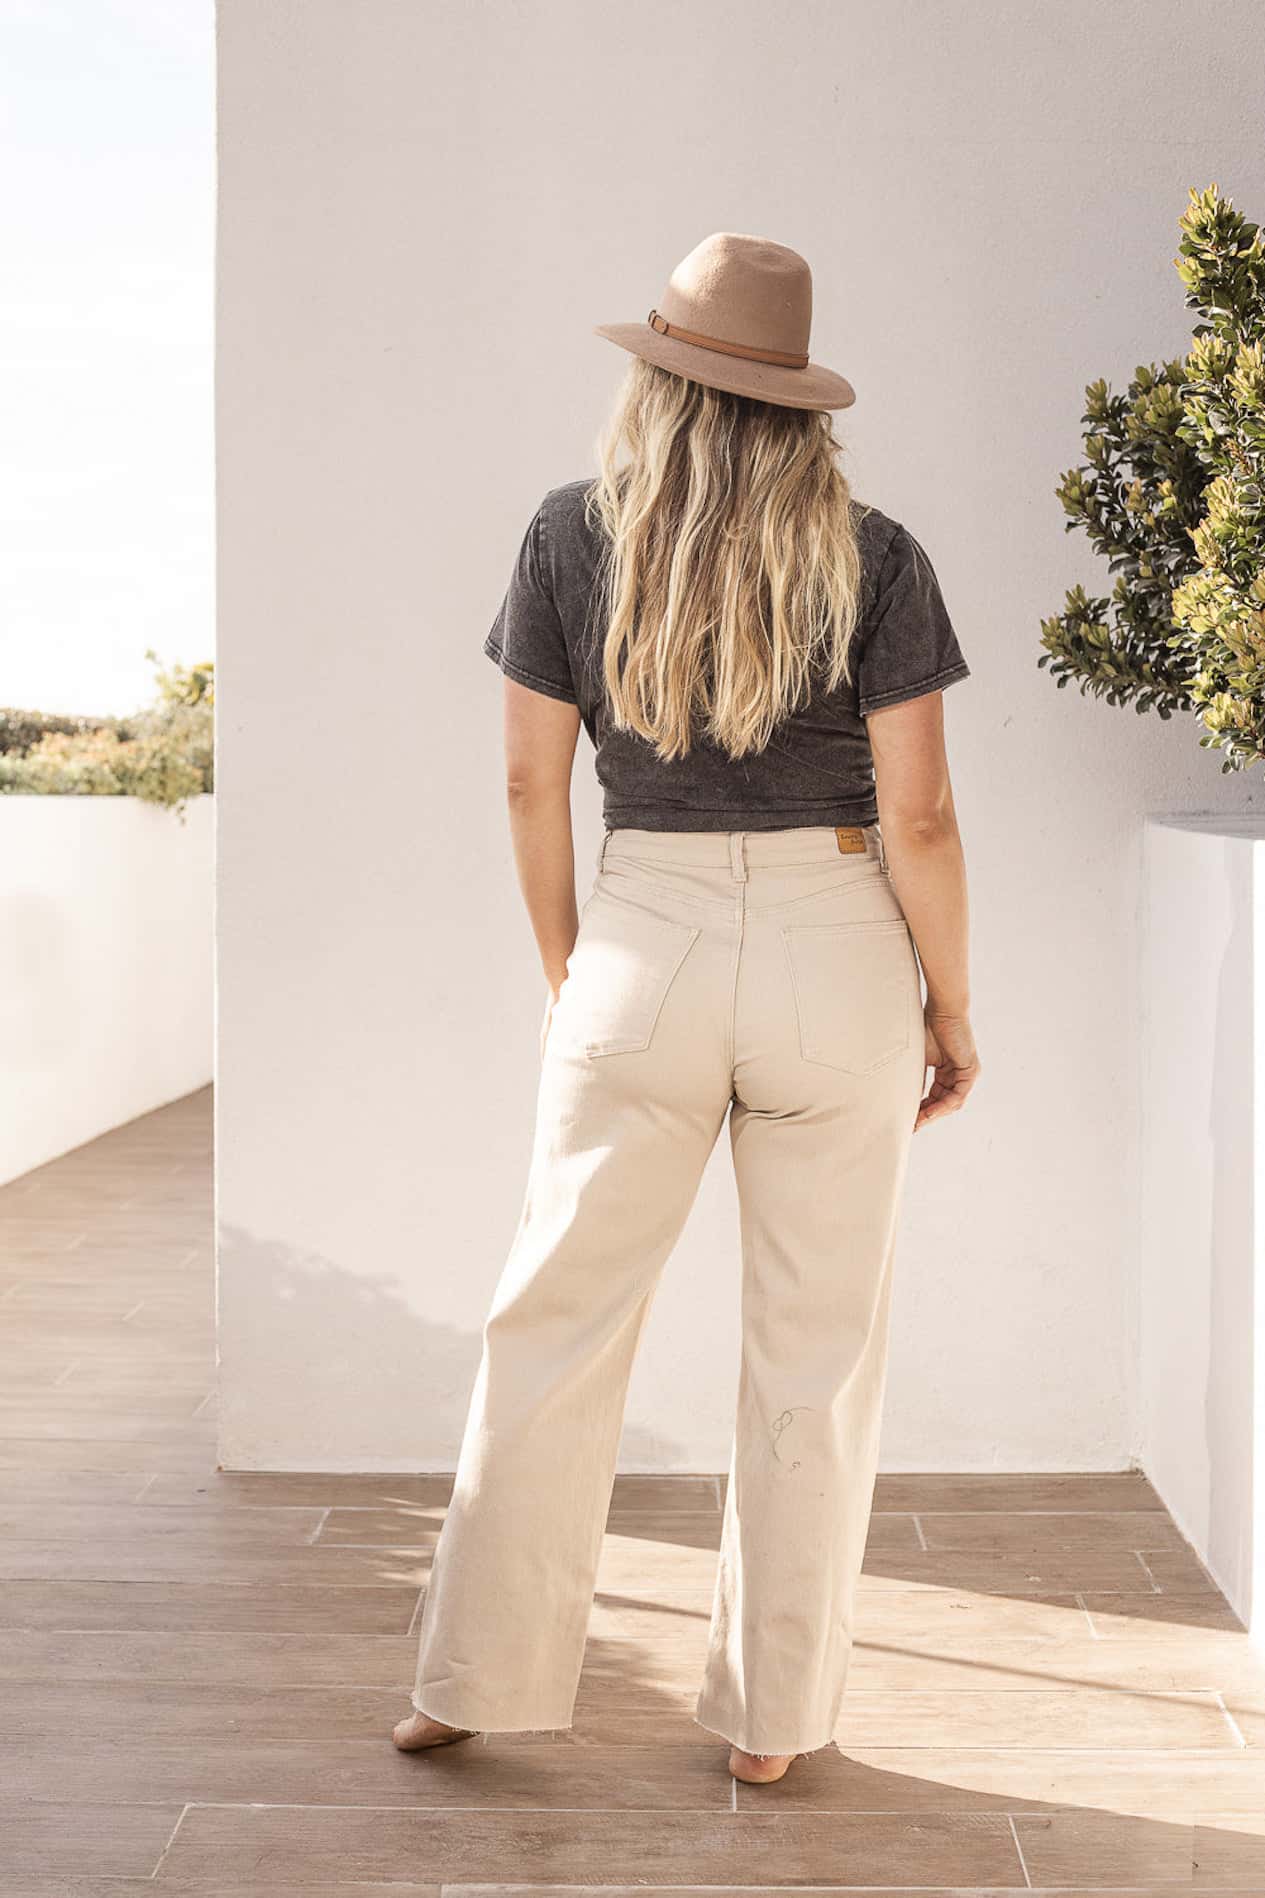 image of a woman with long blonde hair from the back wearing white wide leg jeans, a dark t-shirt, and a hat